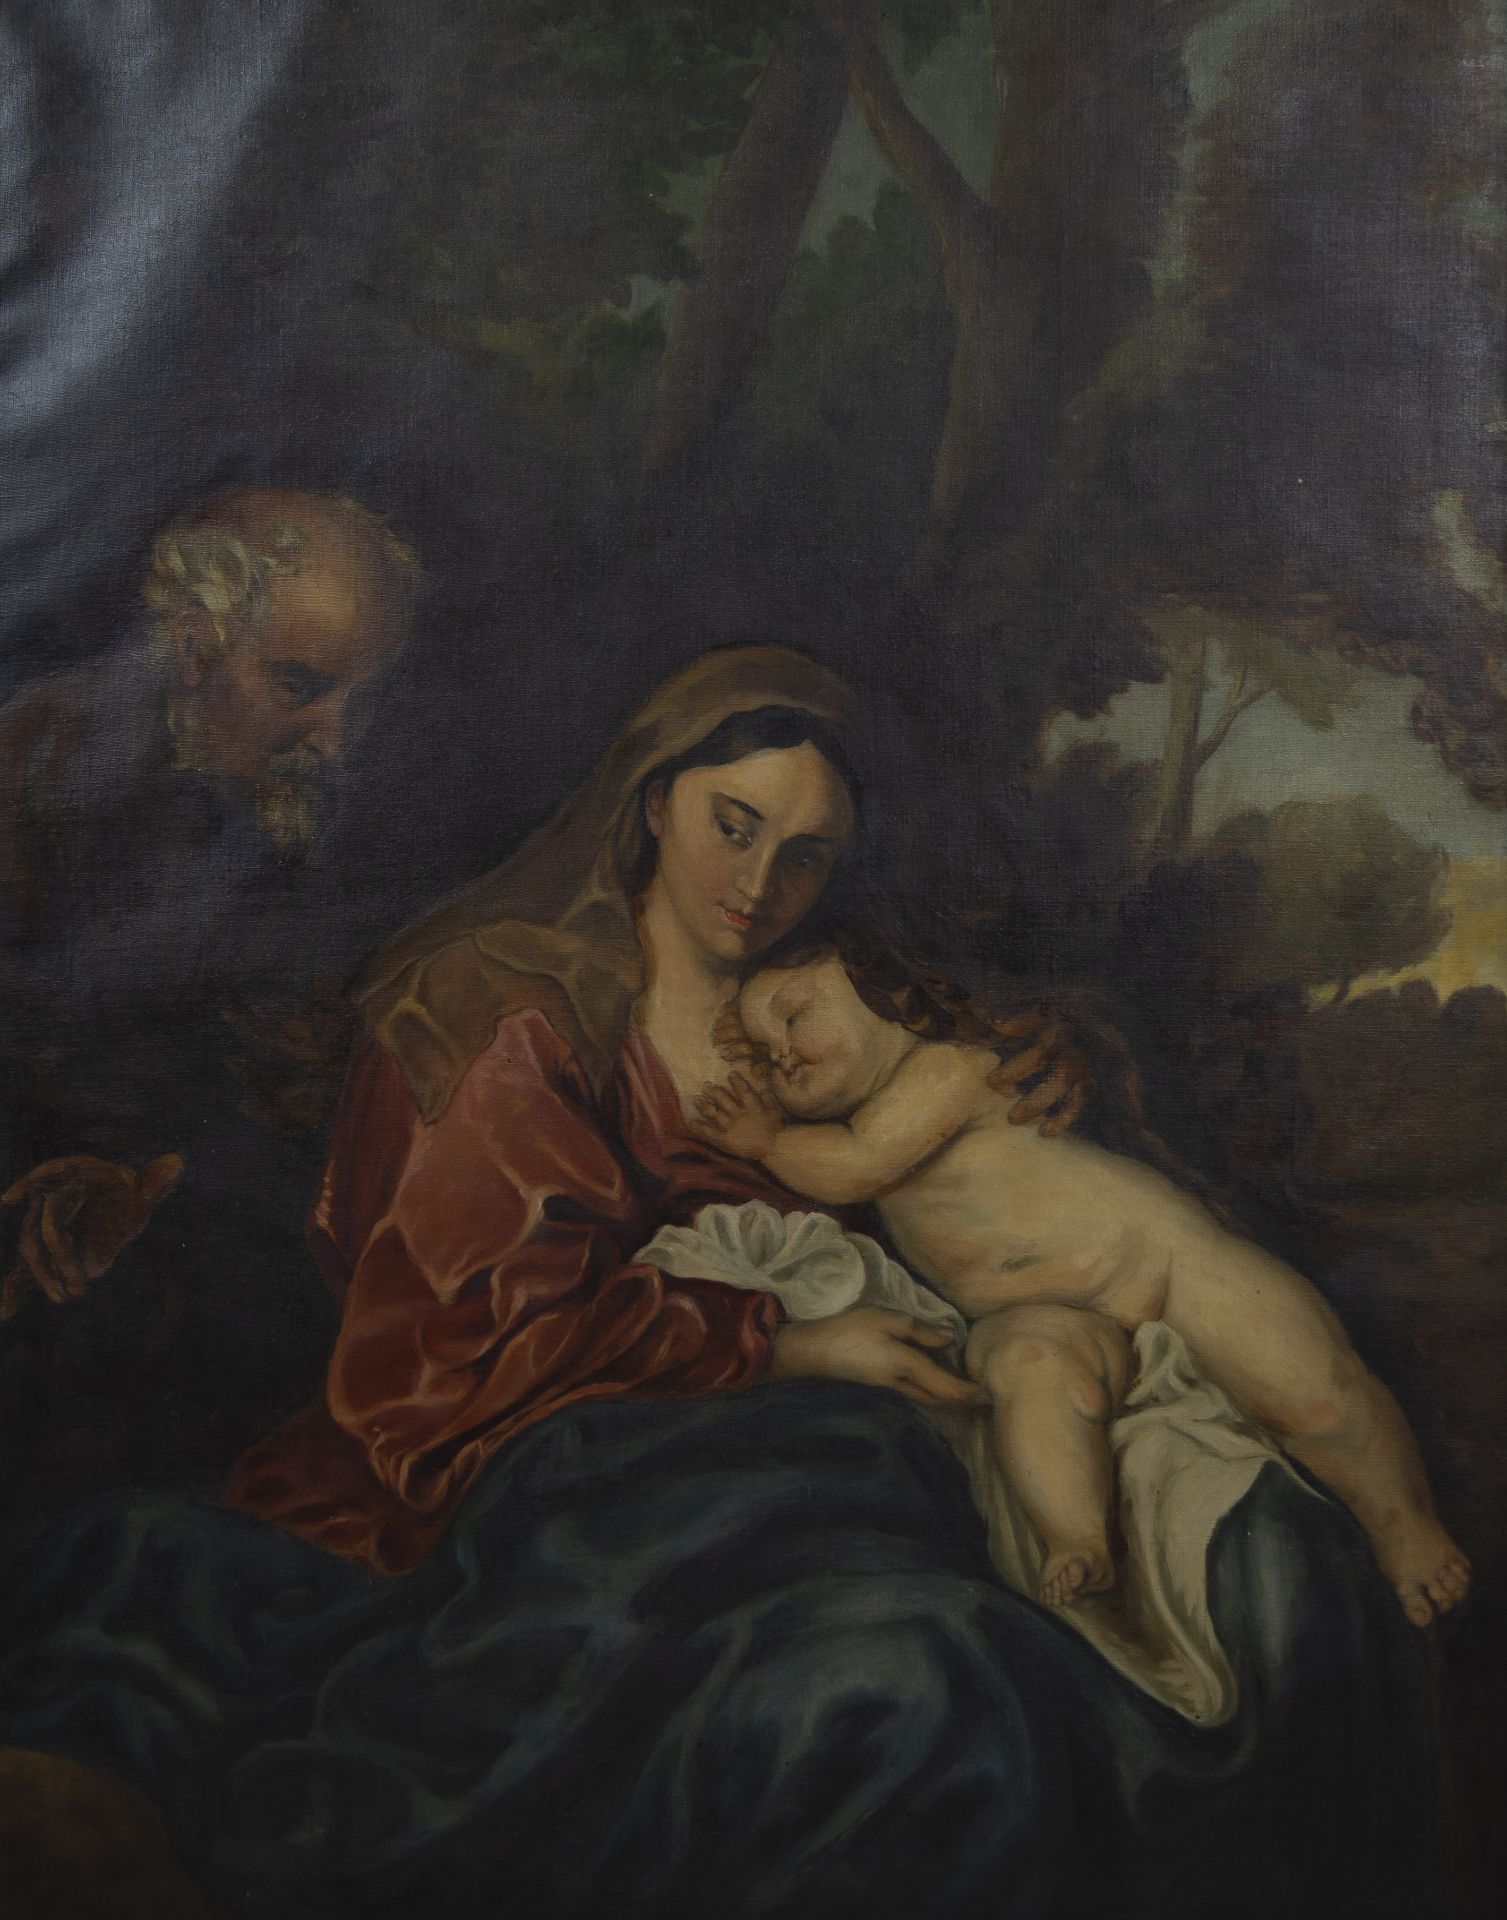 19th century oil on canvas The holy family rests during flight to Egypt, after Anton Van Dyck